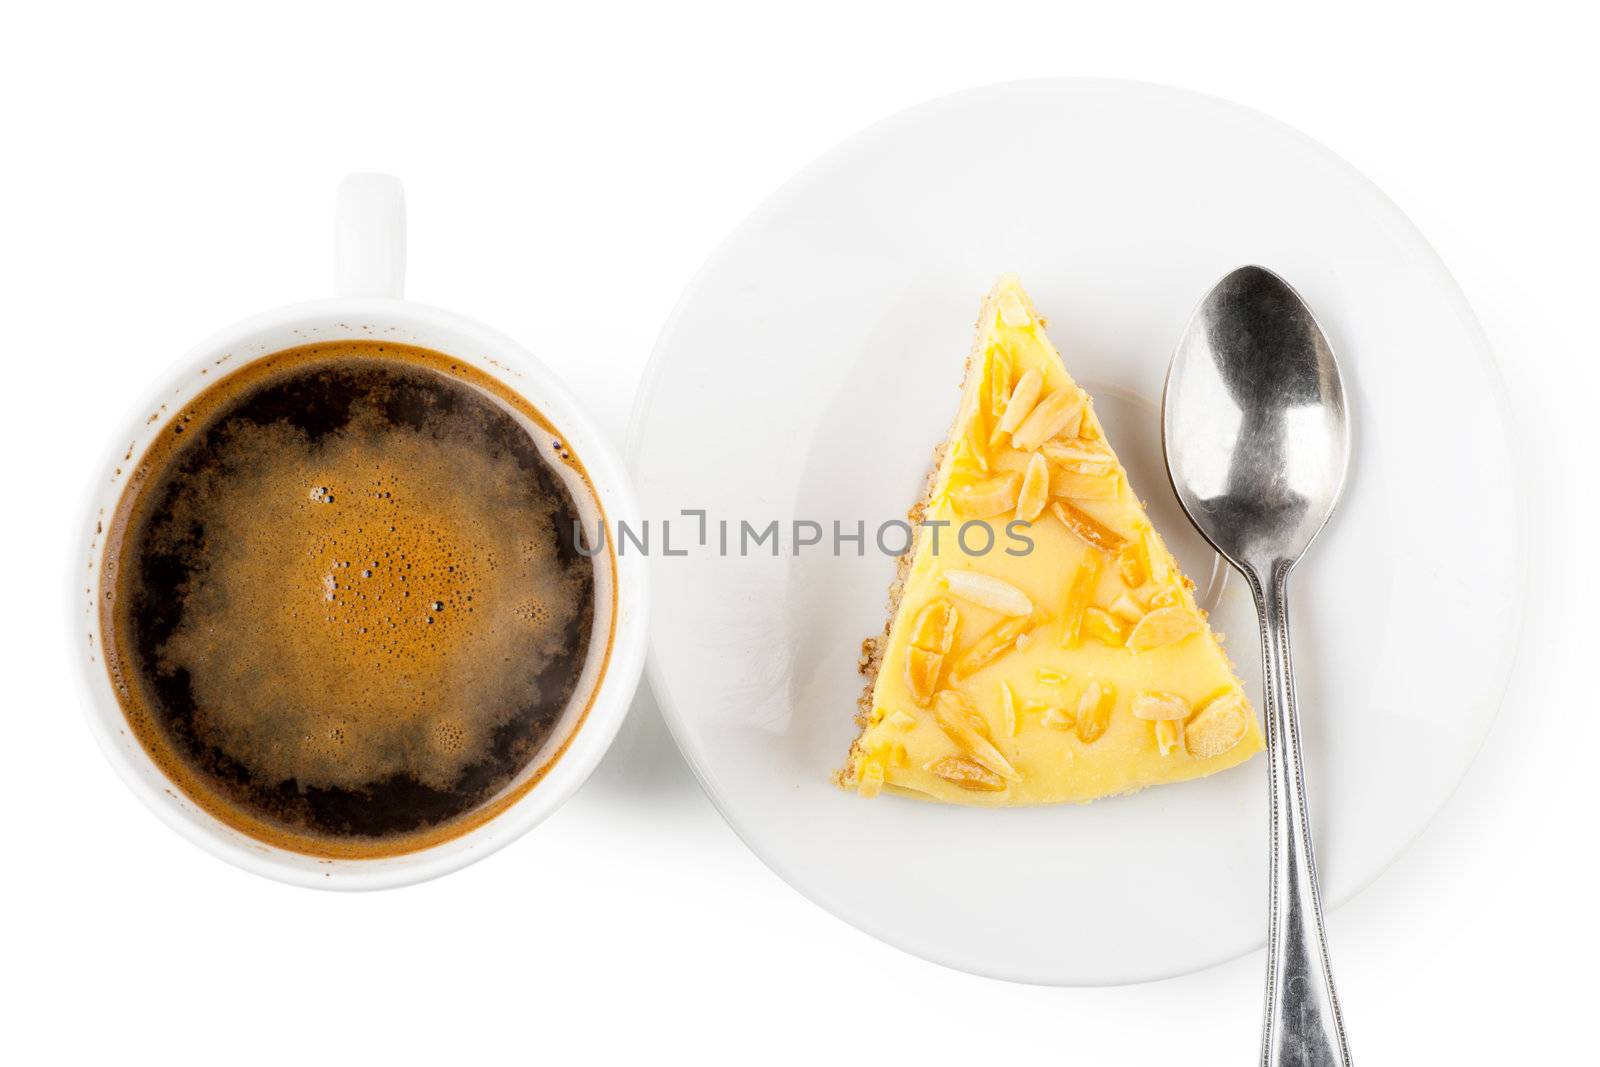 Top view of cup of coffee and piece of pie